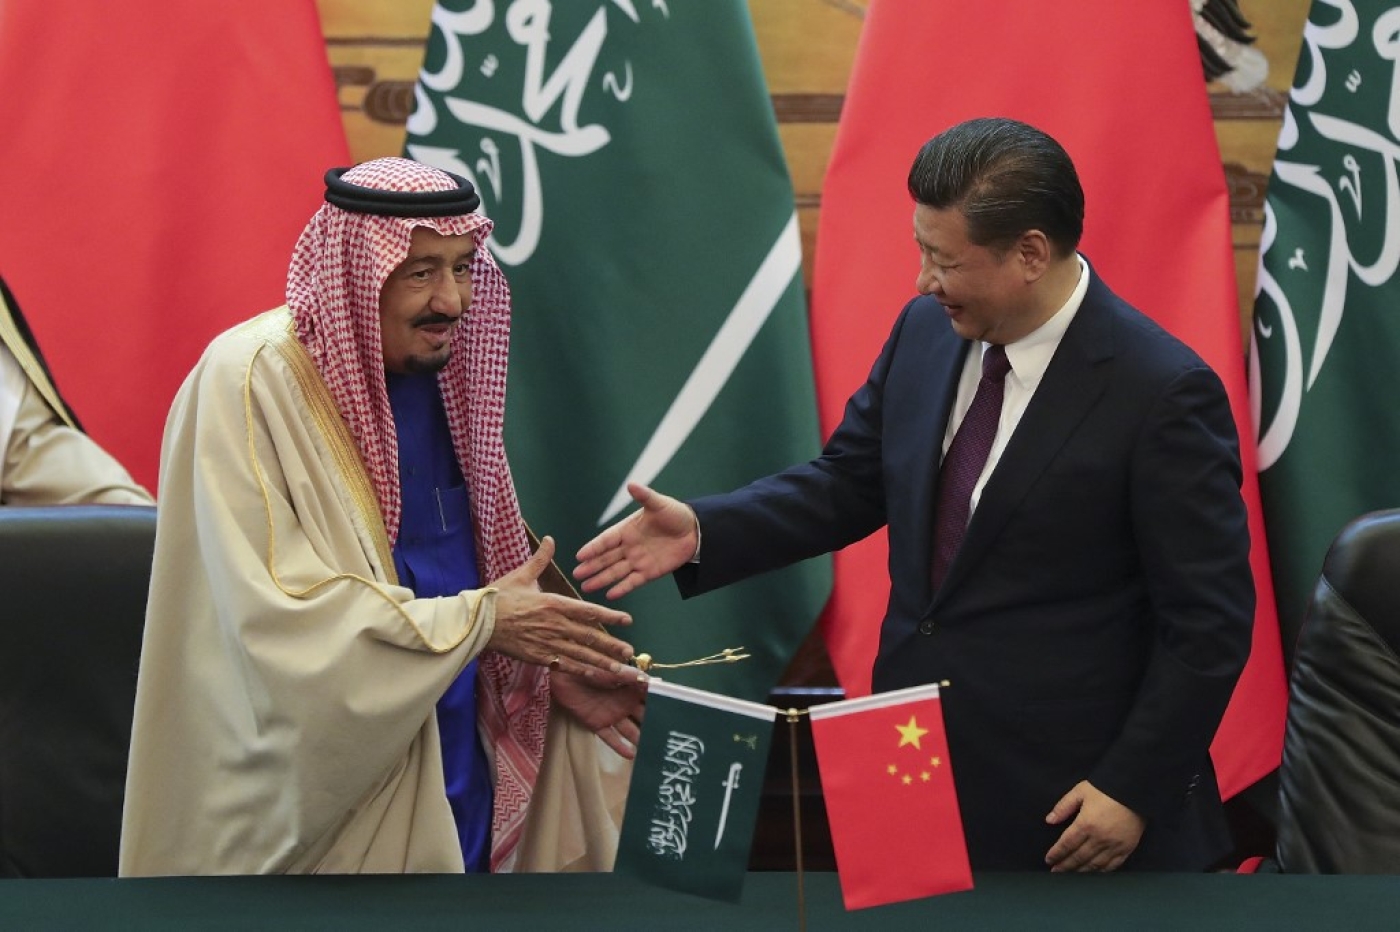 A total of 17 countries in the Middle East have signed up to China's Belt and Road Initiative.